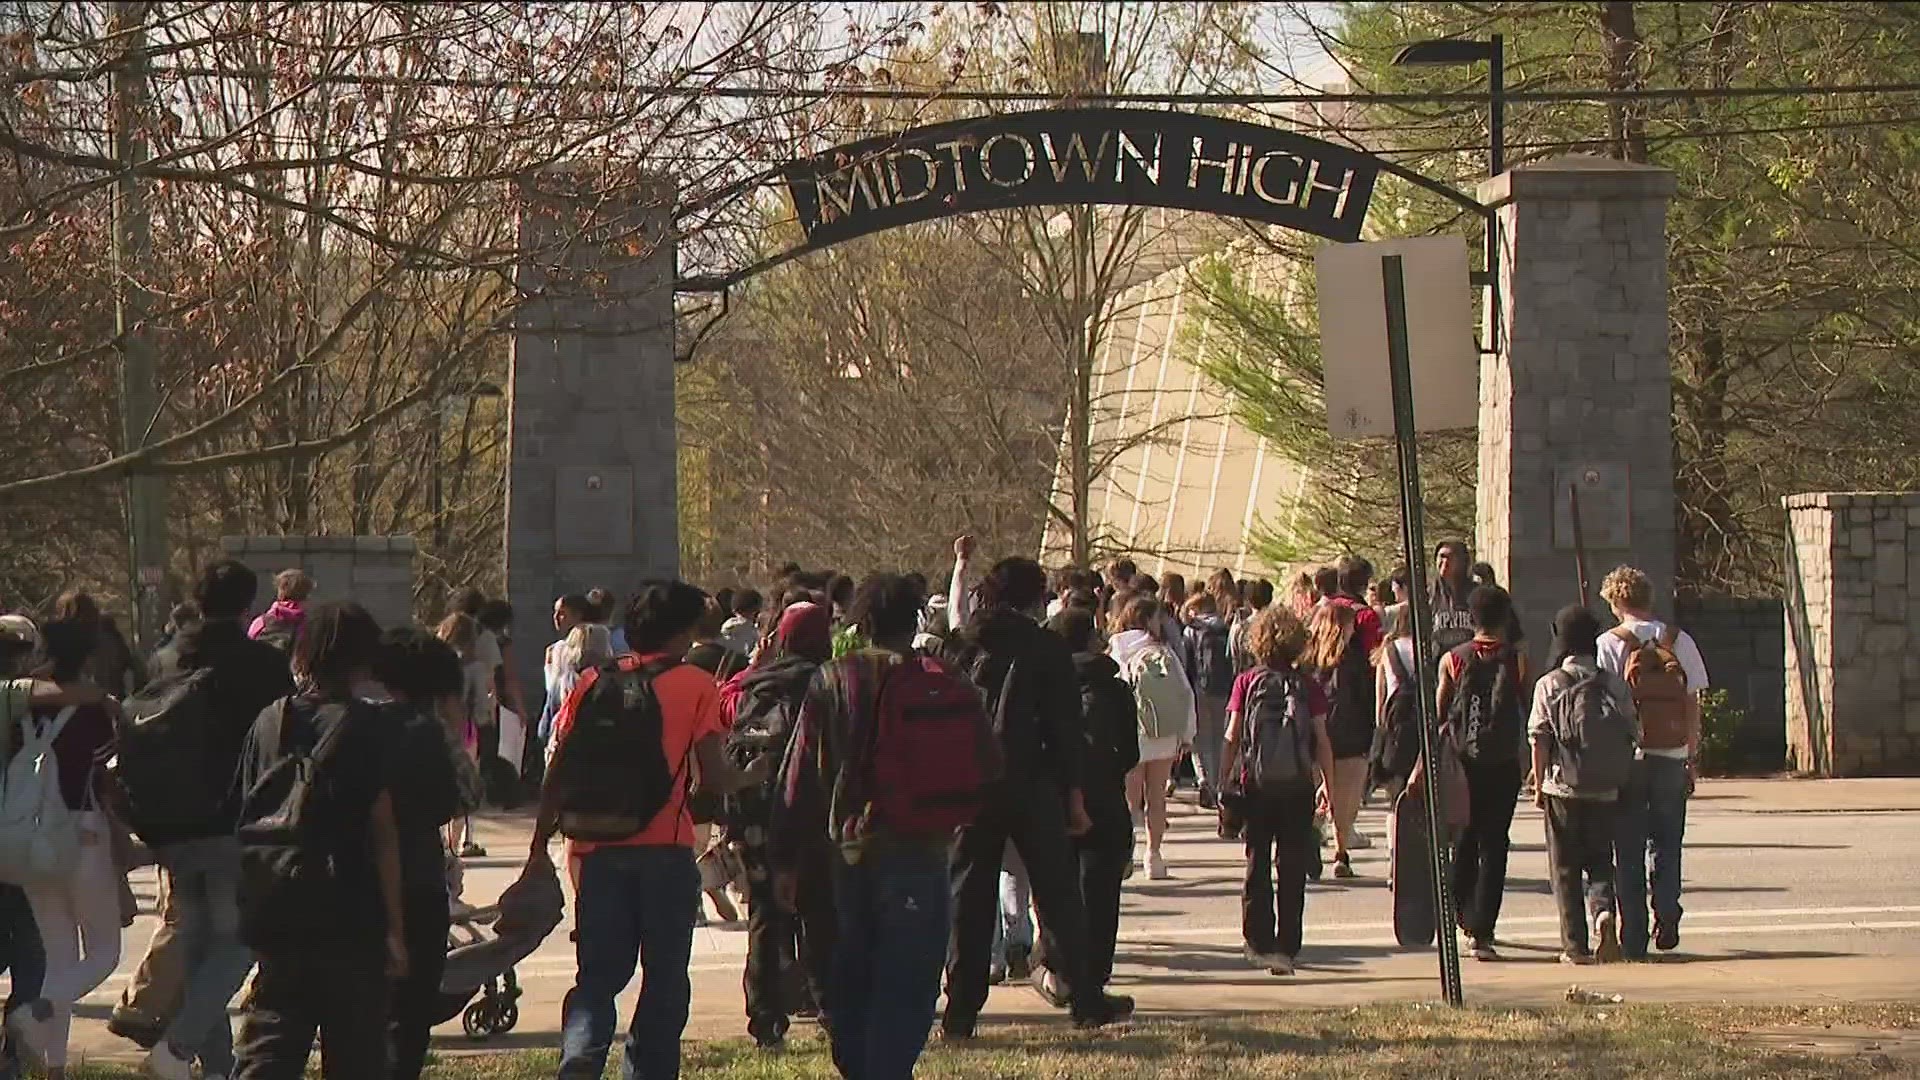 Hundreds of students staged a walkout protest Friday at Midtown High School over a rezoning plan proposed by Atlanta Public Schools.